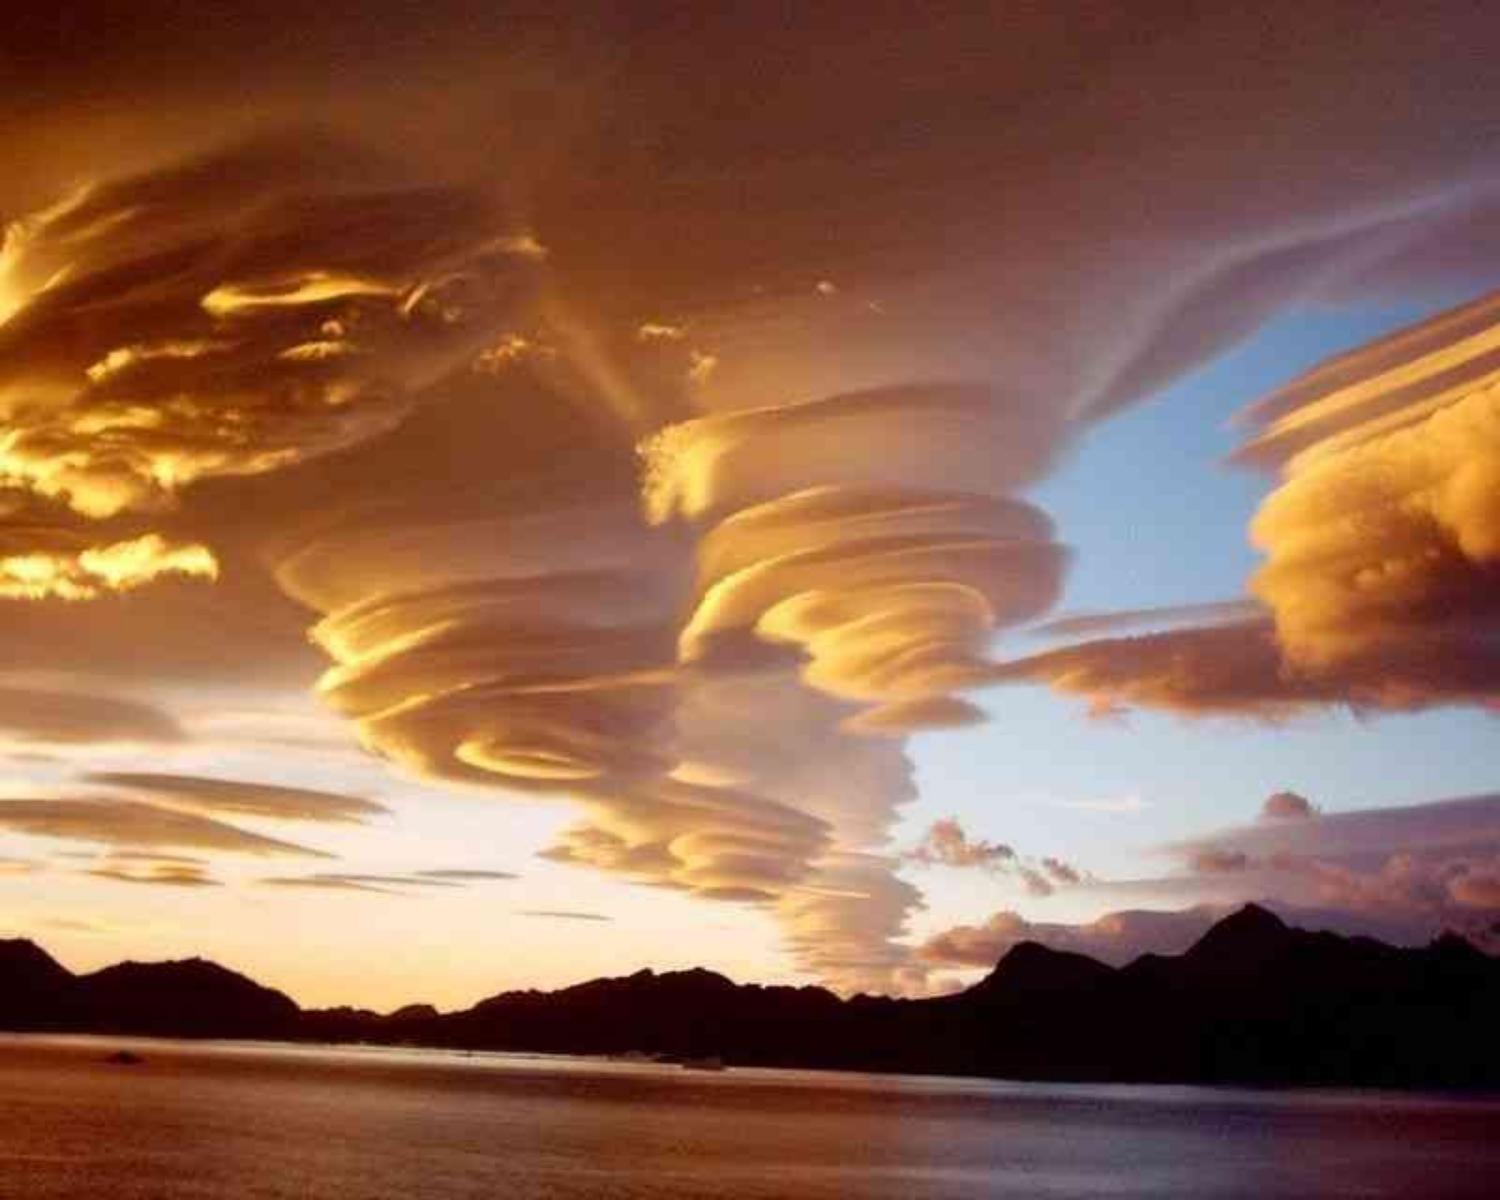 2. The ‘Lenticular Clouds‘ that cap off the beauty of nature.